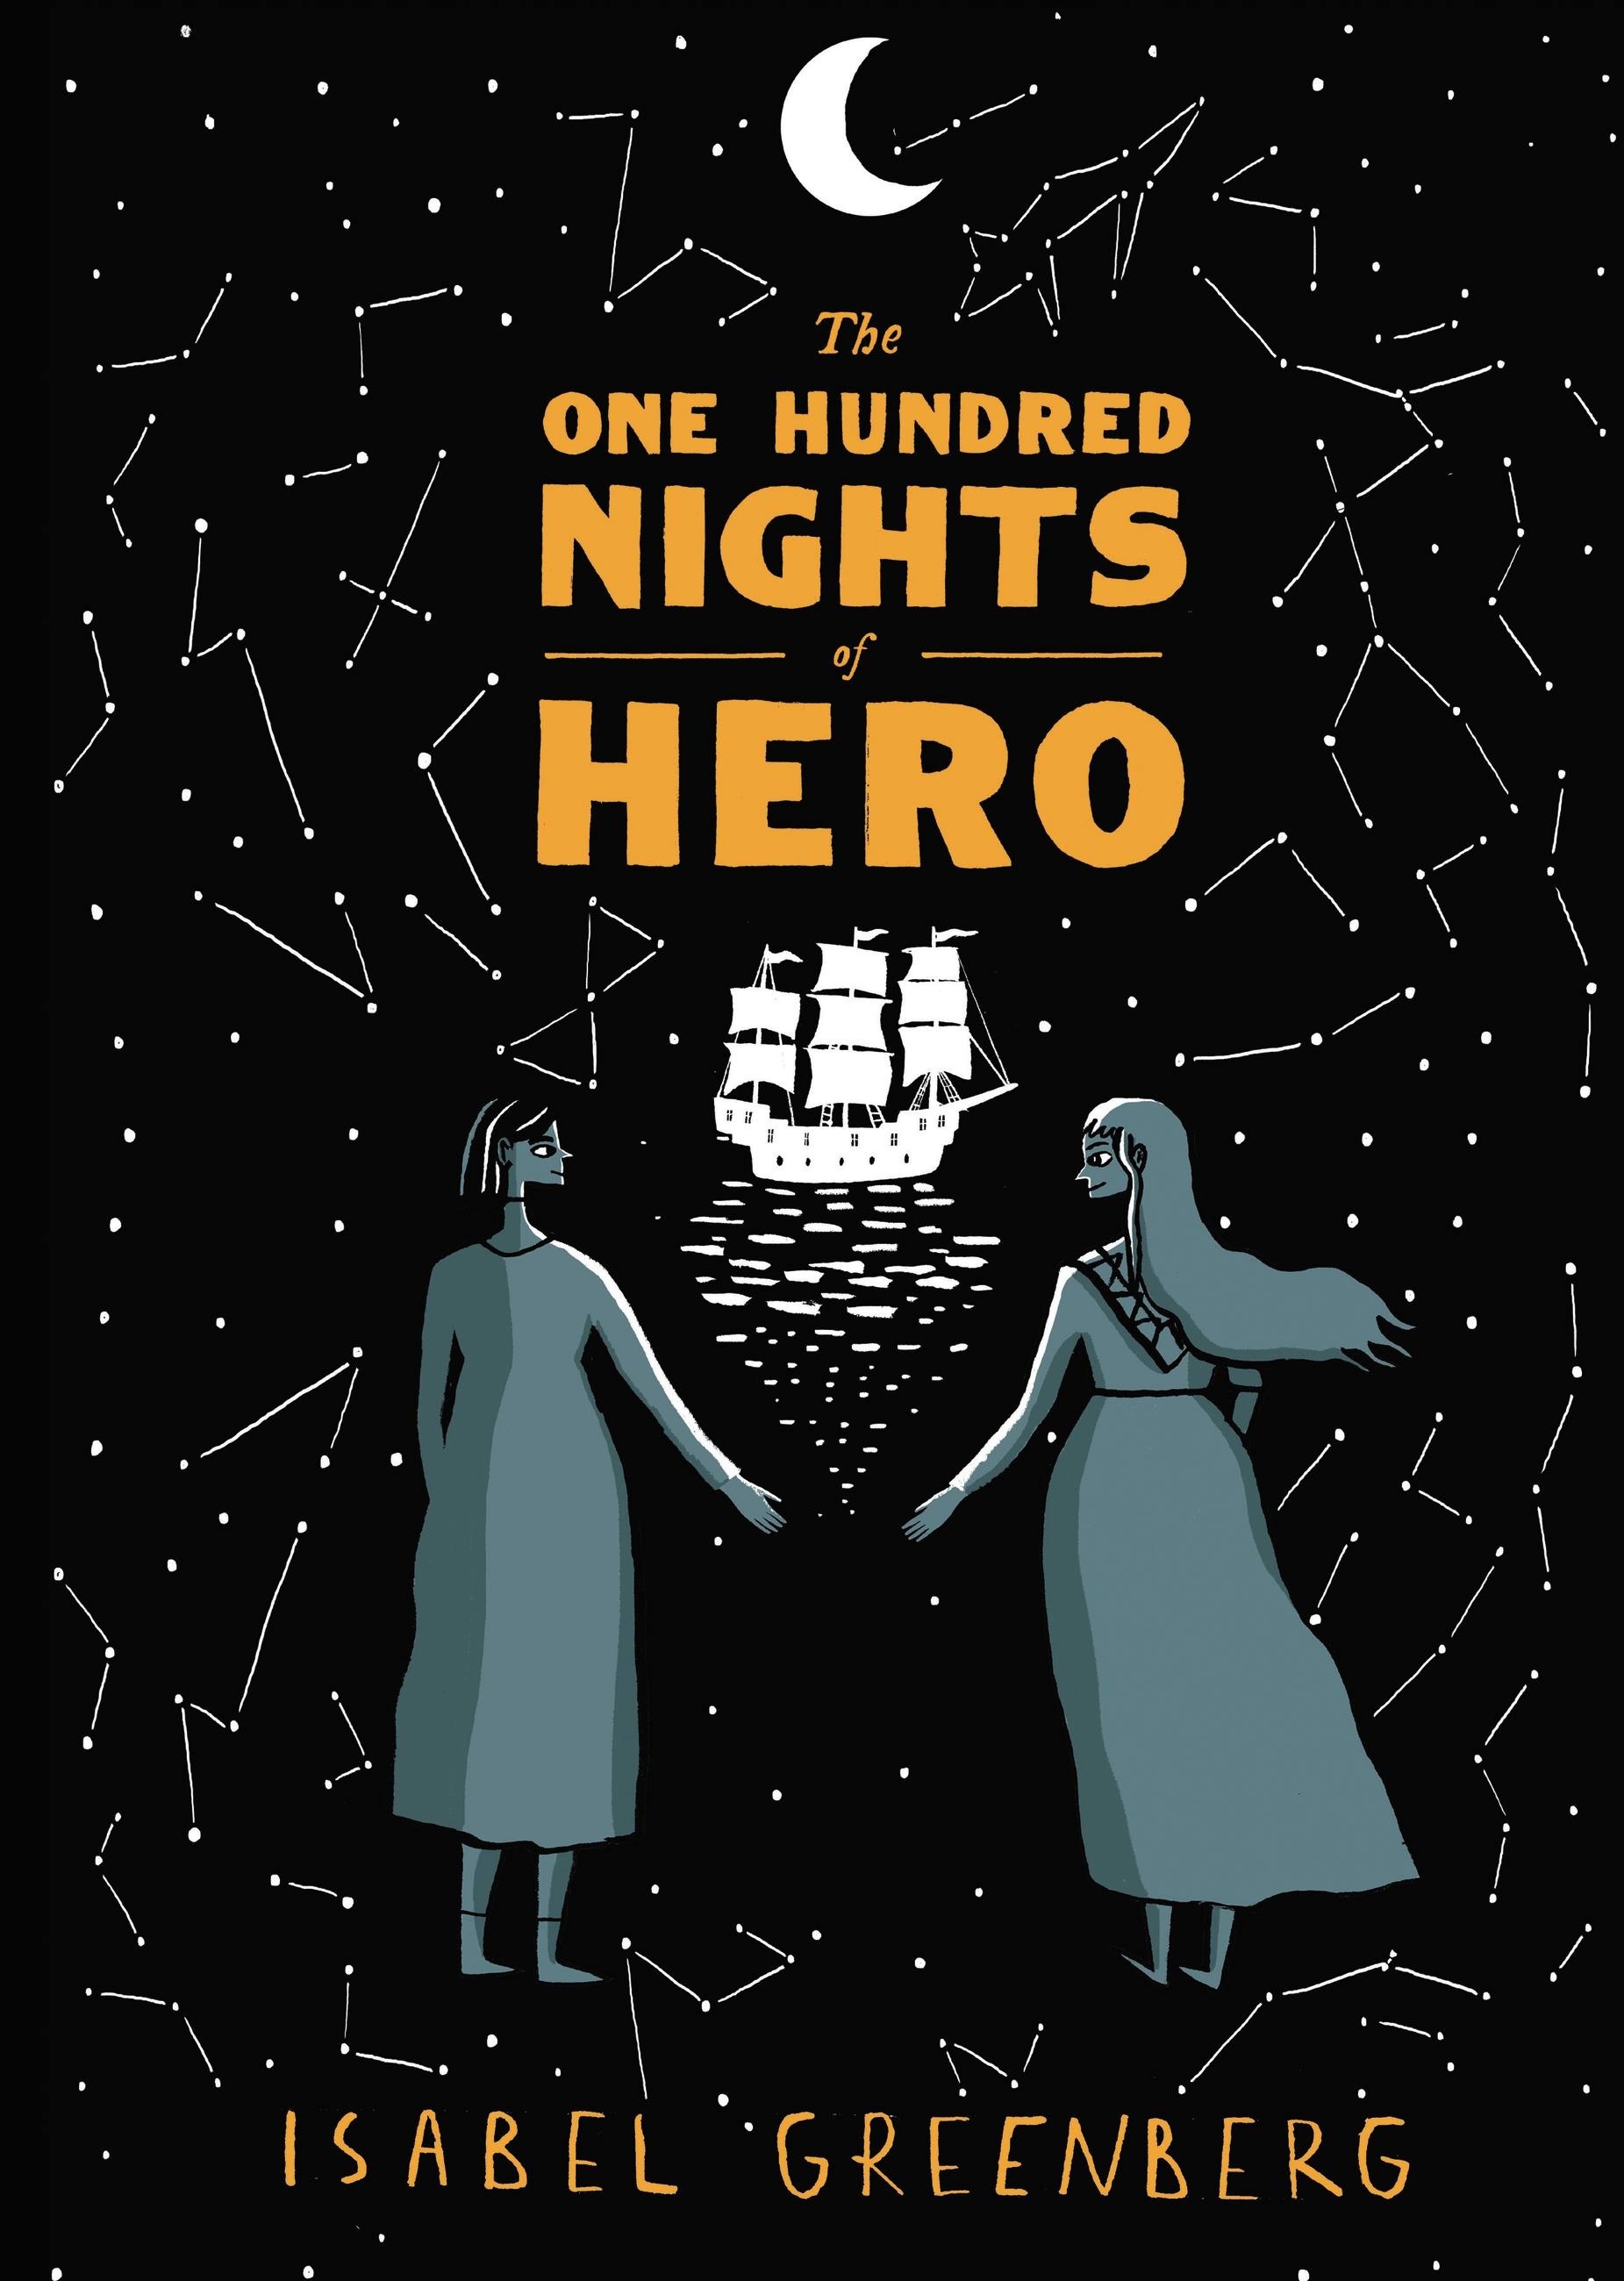 The One Hundred Nights of Hero (GraphicNovel, 2016, Little, Brown and Company)